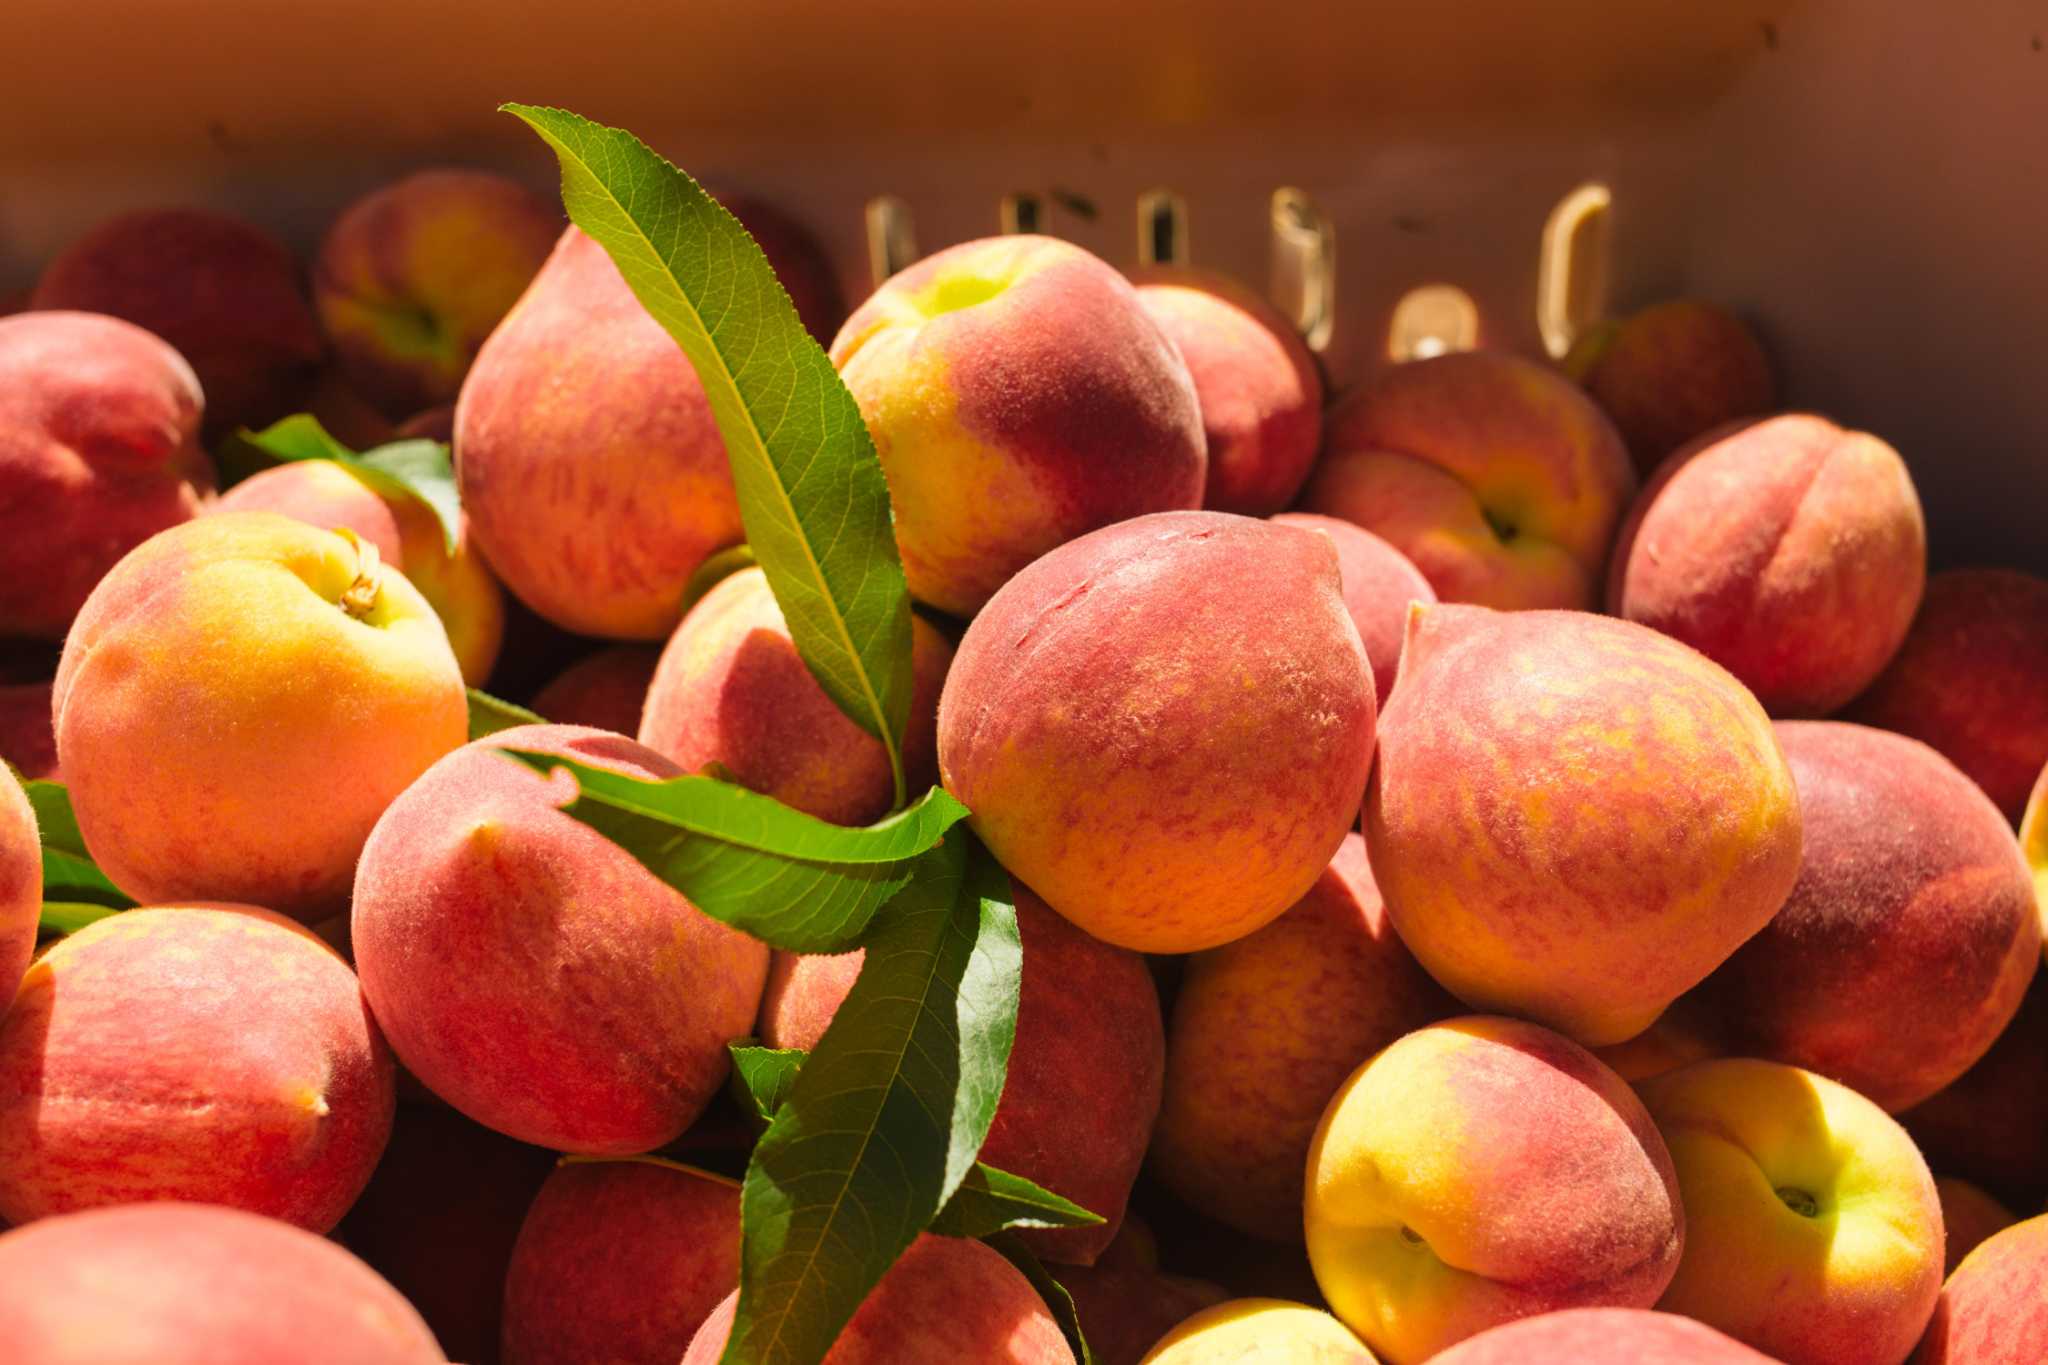 peaches for sale fresh off the truck June 5 in San Antonio with